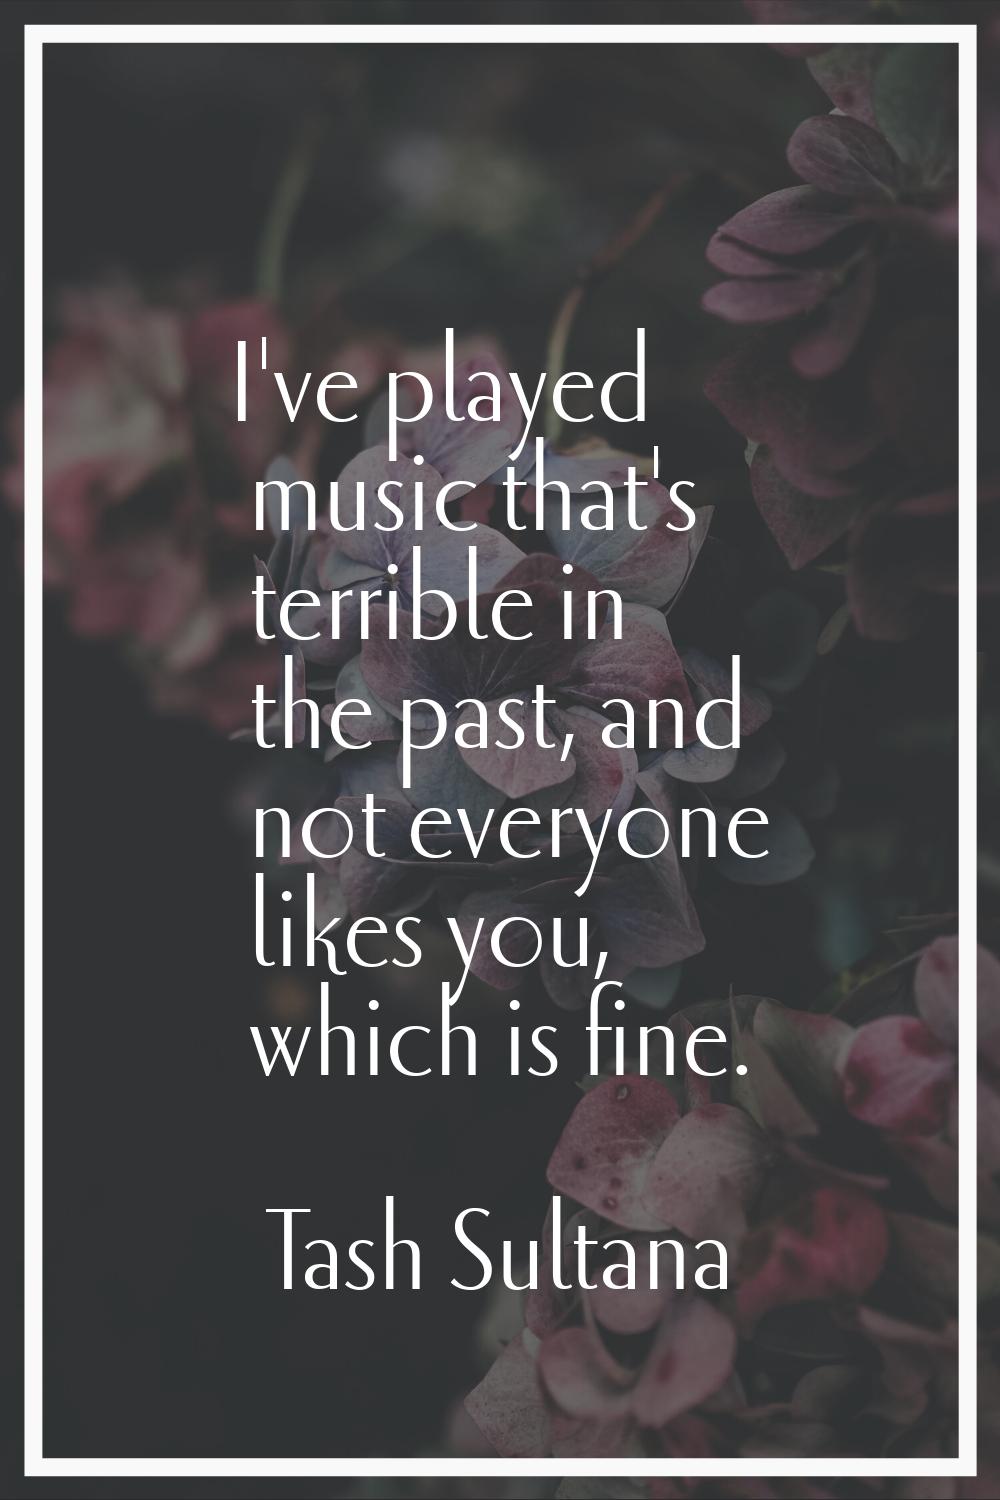 I've played music that's terrible in the past, and not everyone likes you, which is fine.